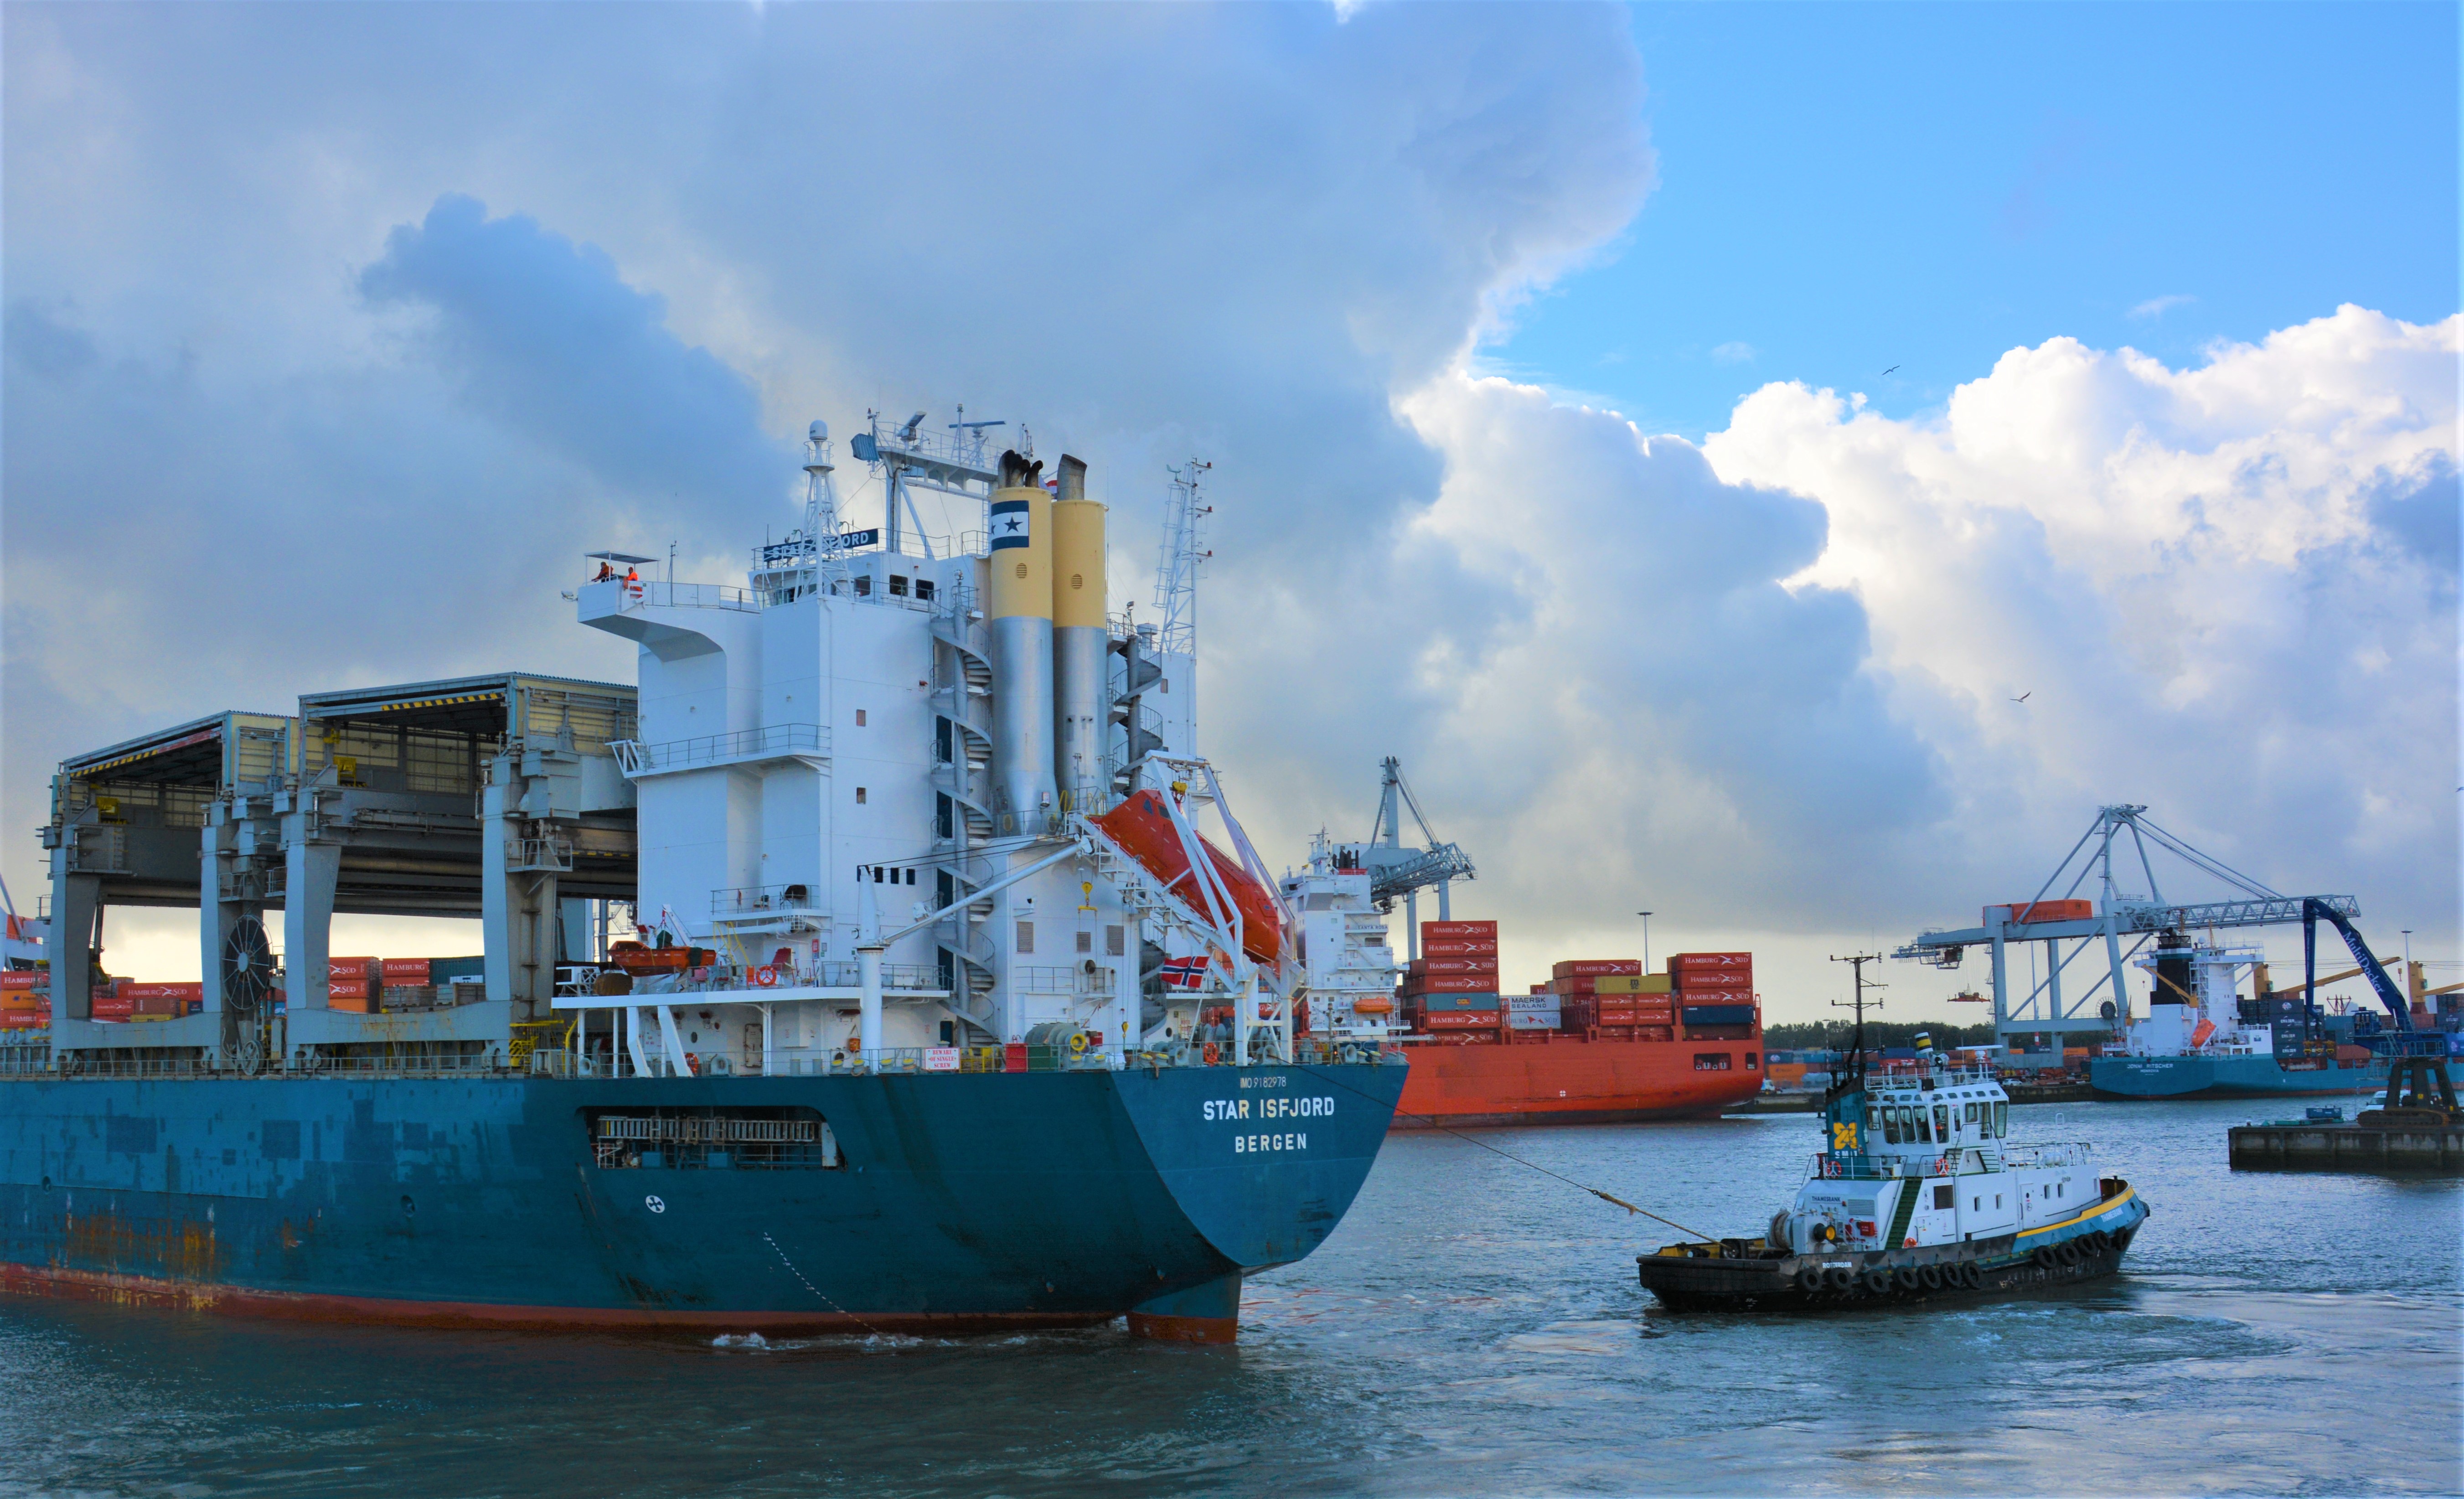 Vessels in operation in the Port of Rotterdam